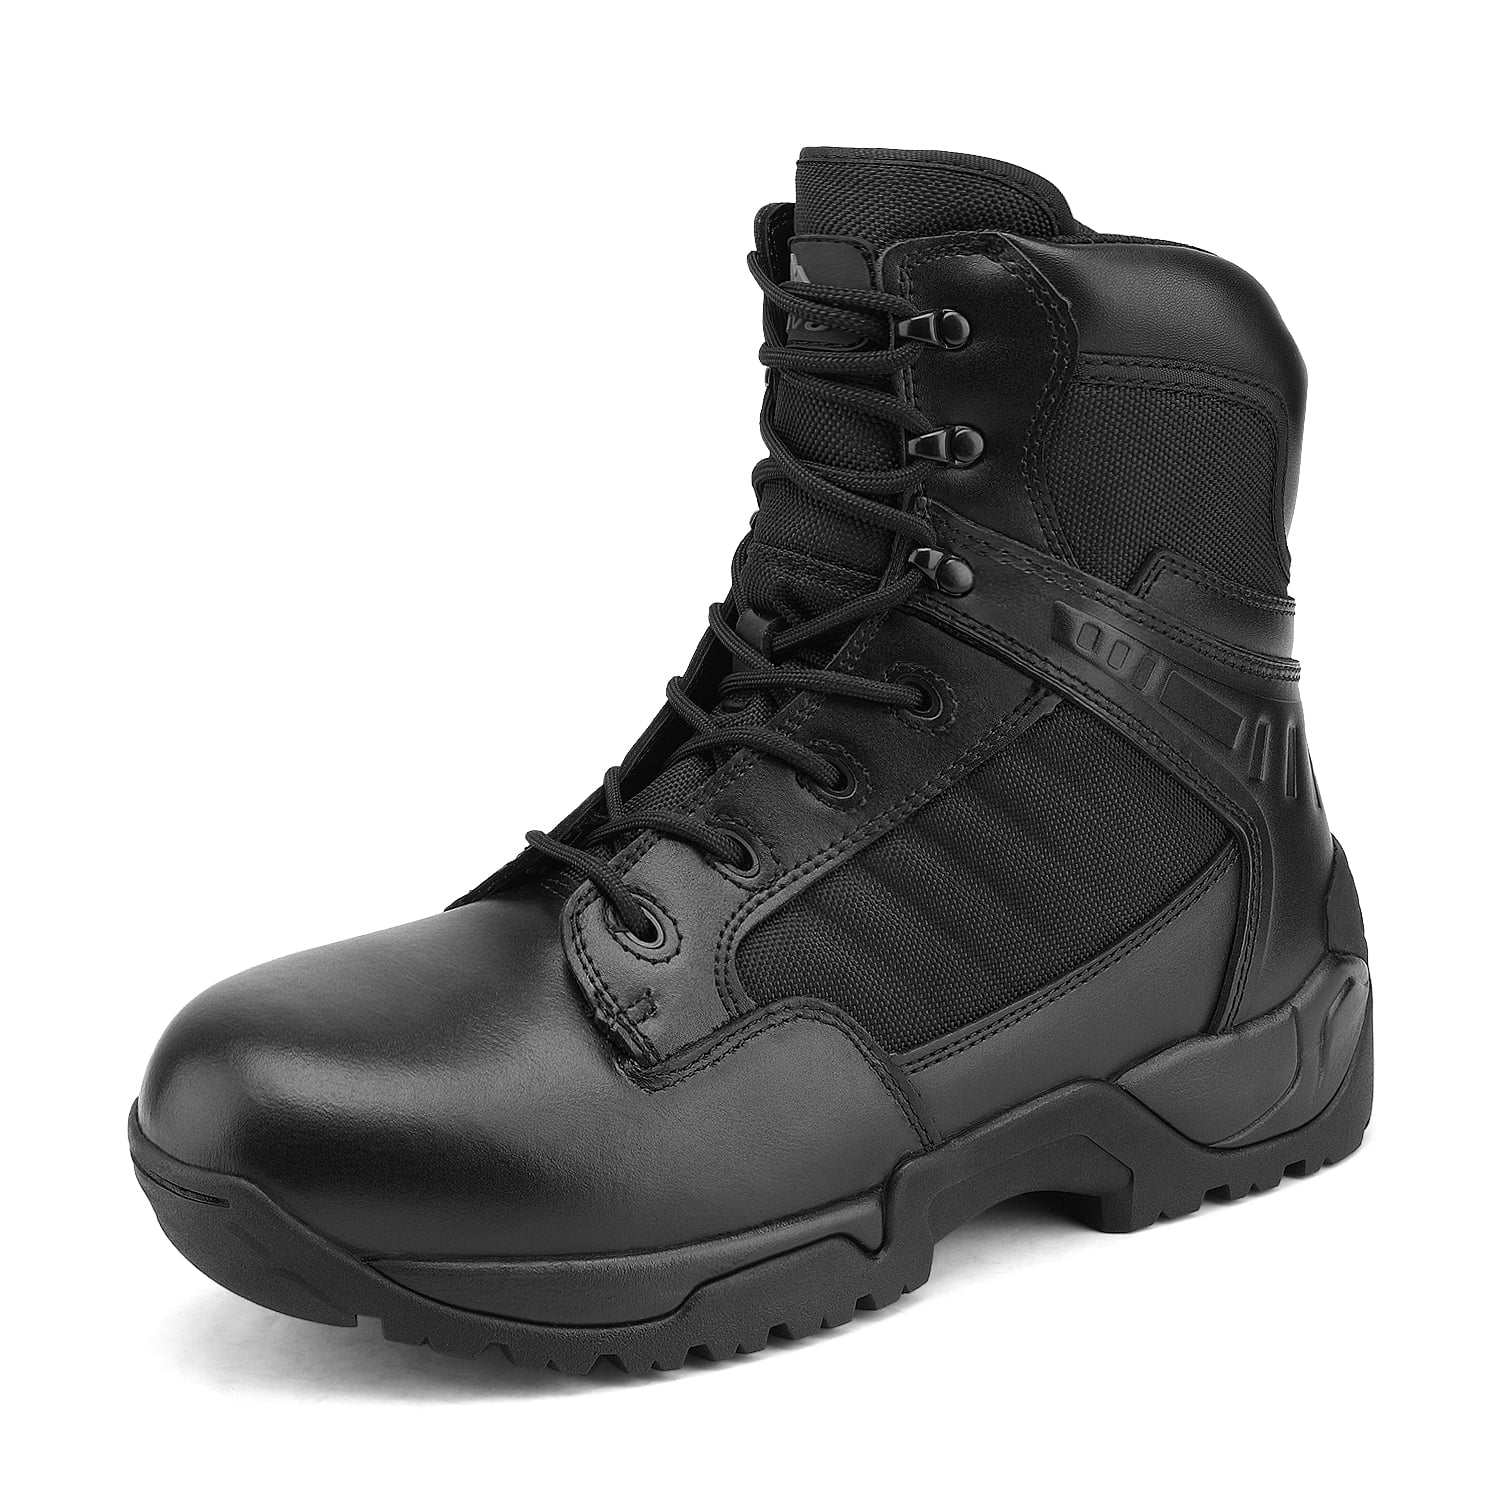 Buy > green patch safety boots walmart > in stock